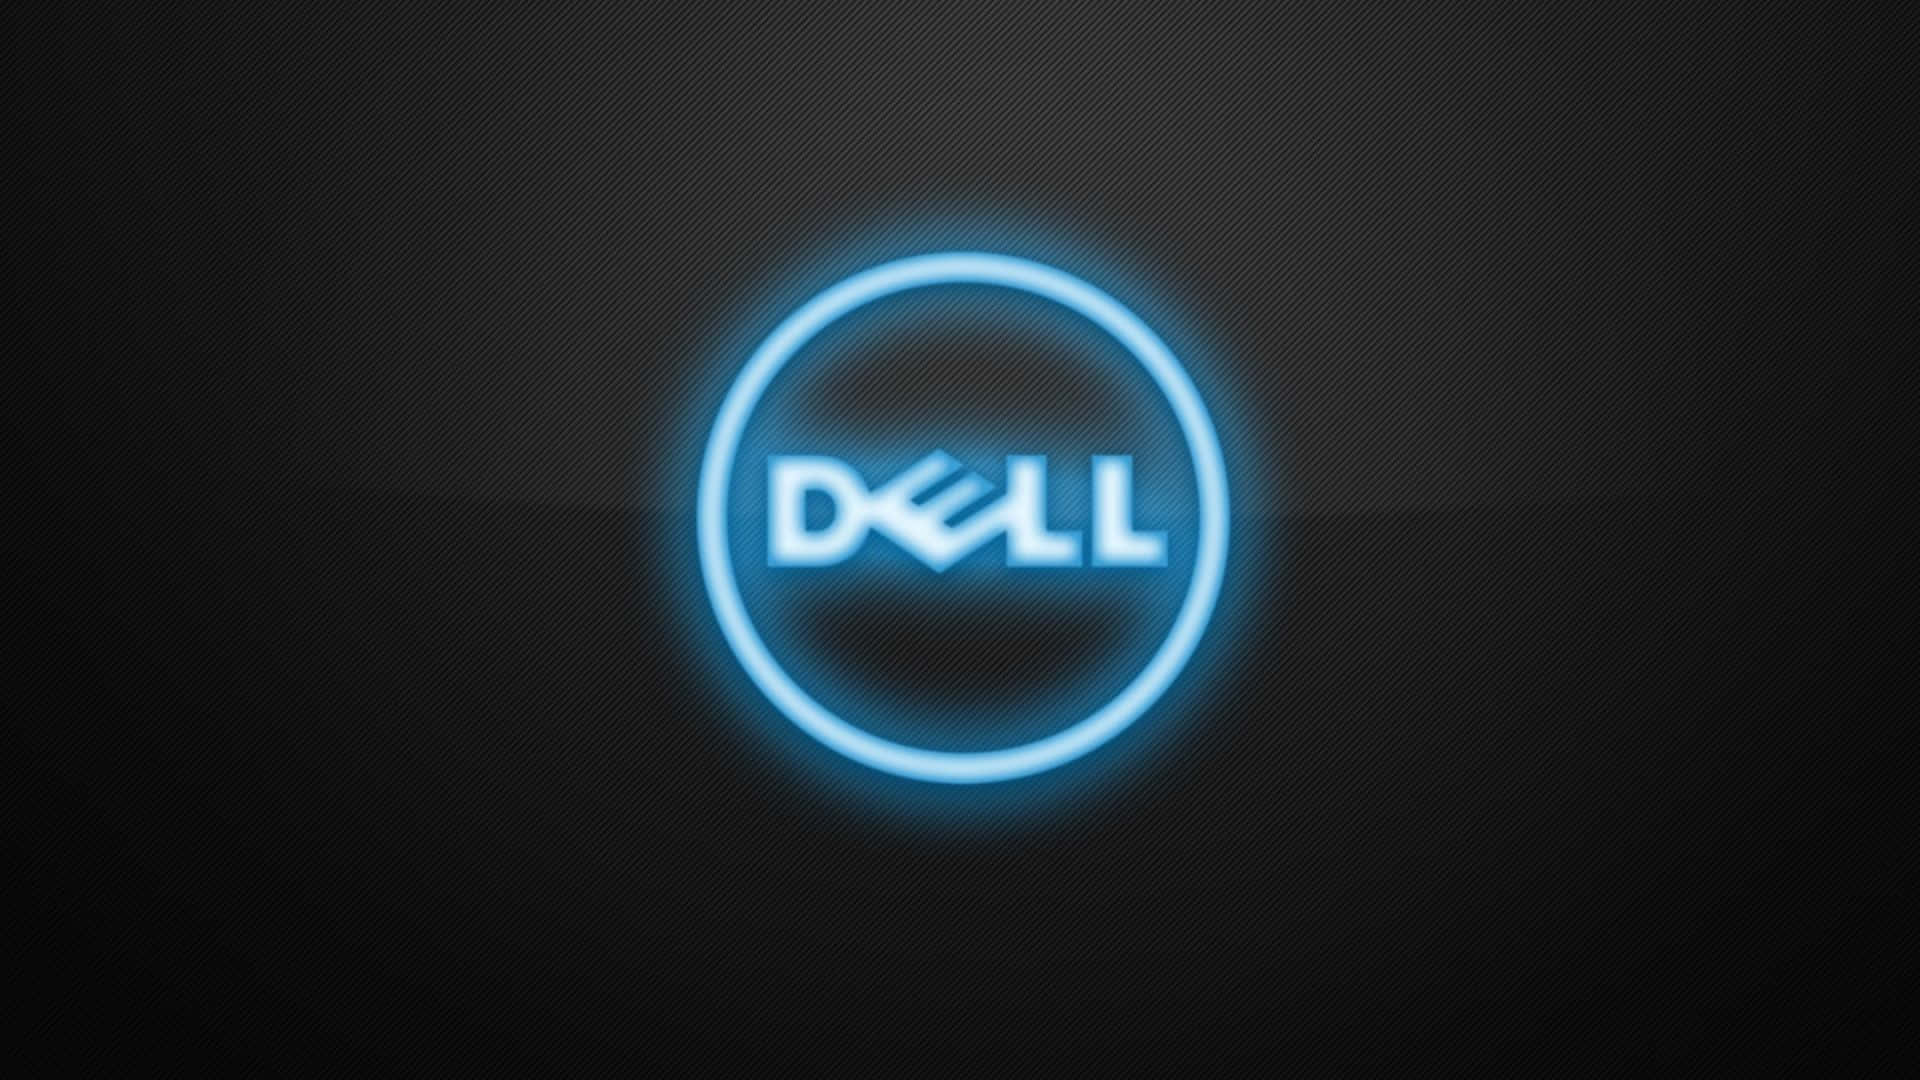 Dell Logo On A Black Background